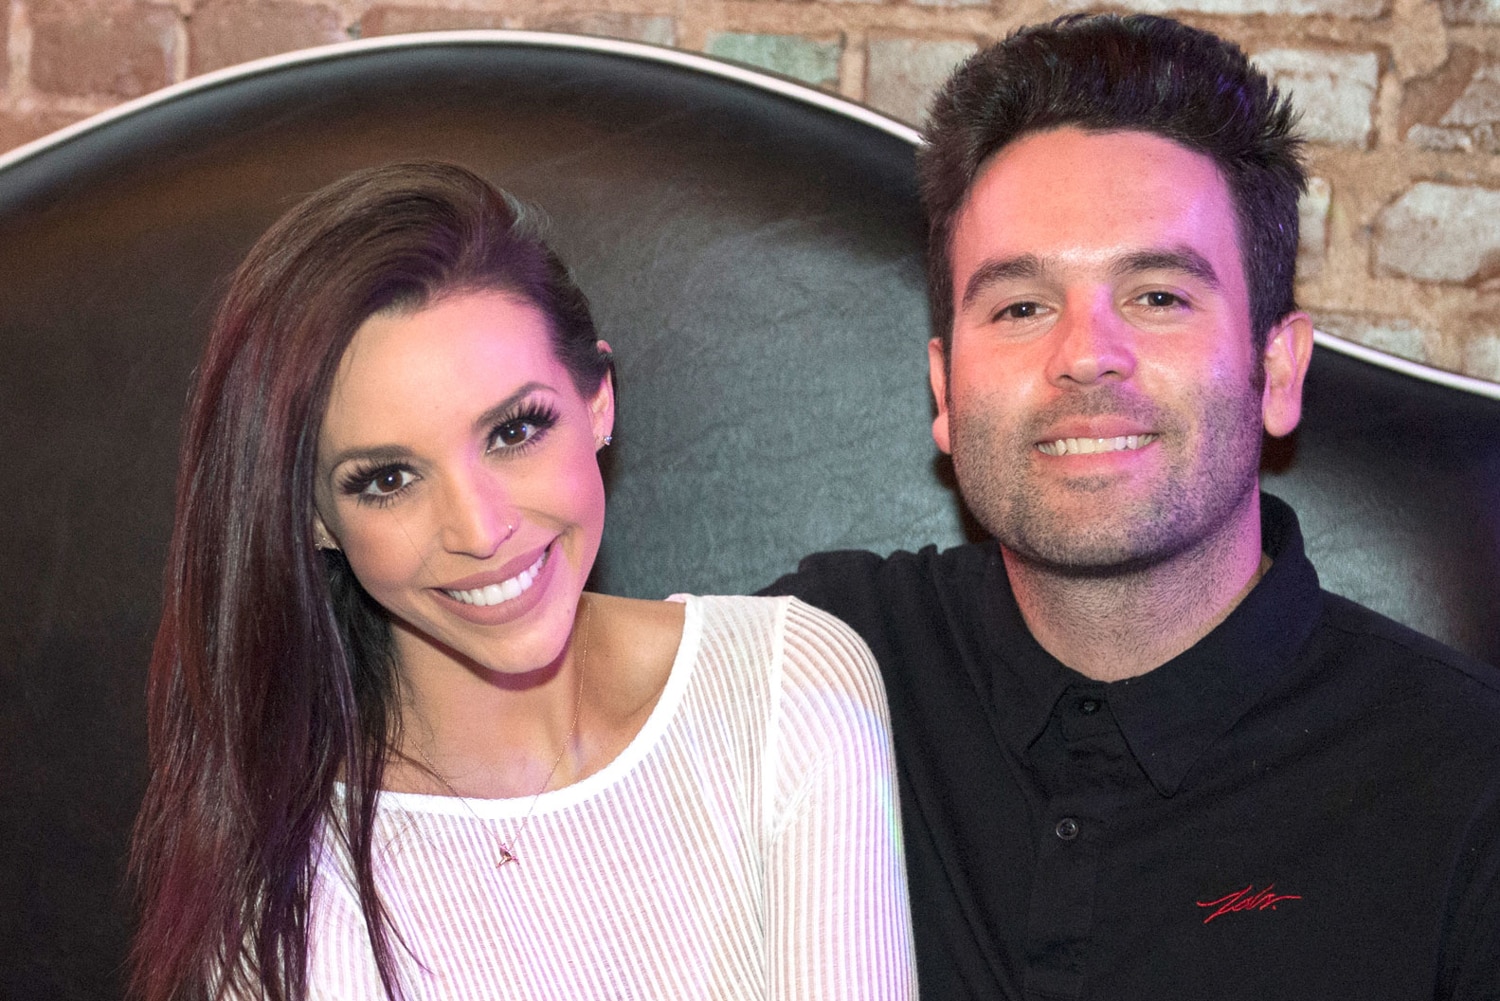 Scheana Shay on Her $50,000 Divorce Settlement to Mike Shay | The Daily Dish